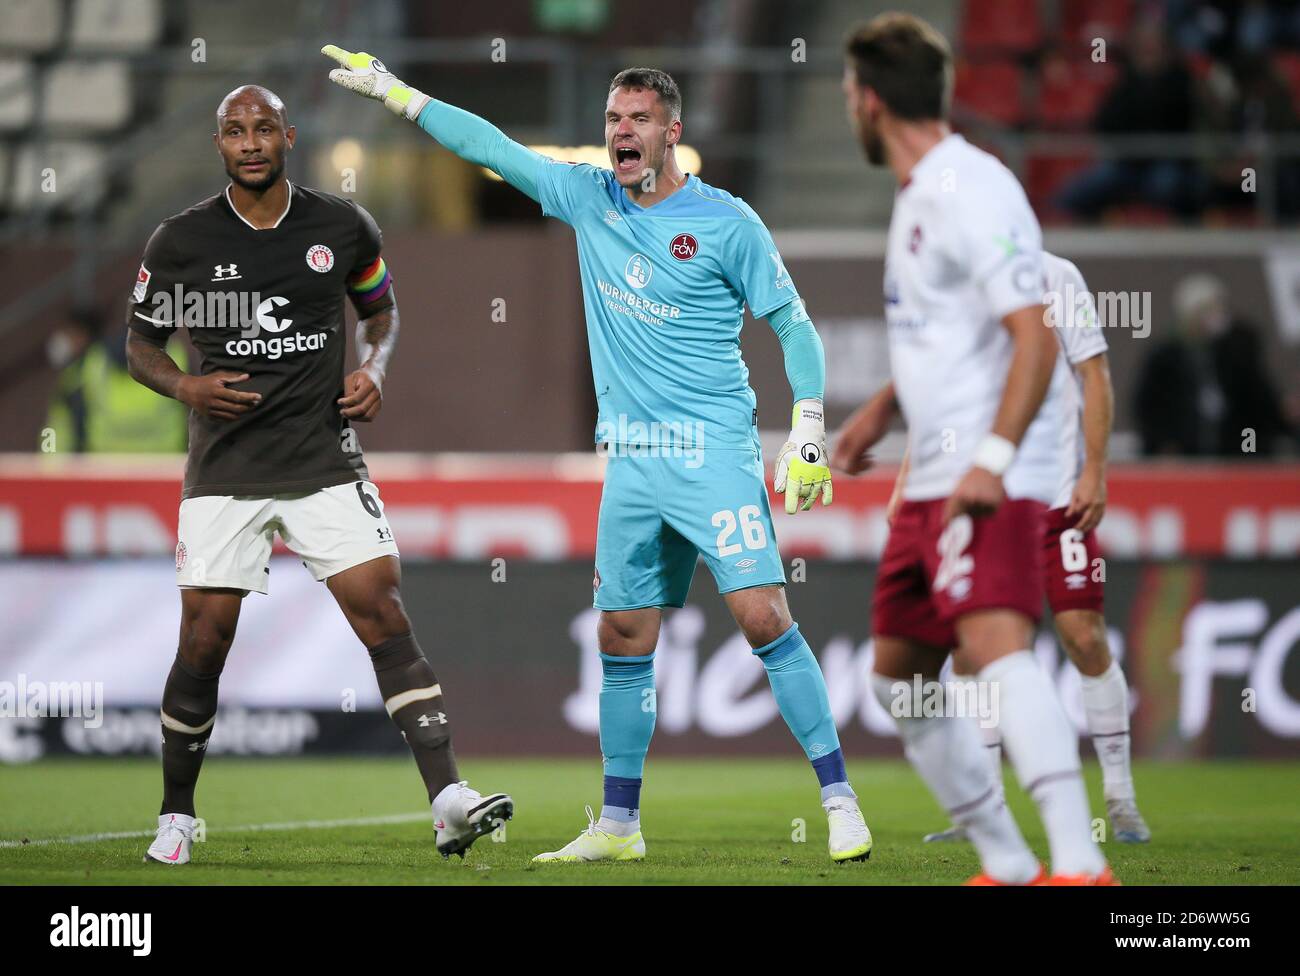 Hamburg, Germany. 19th Oct, 2020. Football: 2nd Bundesliga, 4th matchday, FC St. Pauli - 1st FC Nürnberg, at the Millerntor stadium. Nuremberg goalkeeper Christian Mathenia (M) gestures. Credit: Selim Sudheimer/dpa - IMPORTANT NOTE: In accordance with the regulations of the DFL Deutsche Fußball Liga and the DFB Deutscher Fußball-Bund, it is prohibited to exploit or have exploited in the stadium and/or from the game taken photographs in the form of sequence images and/or video-like photo series./dpa/Alamy Live News Stock Photo